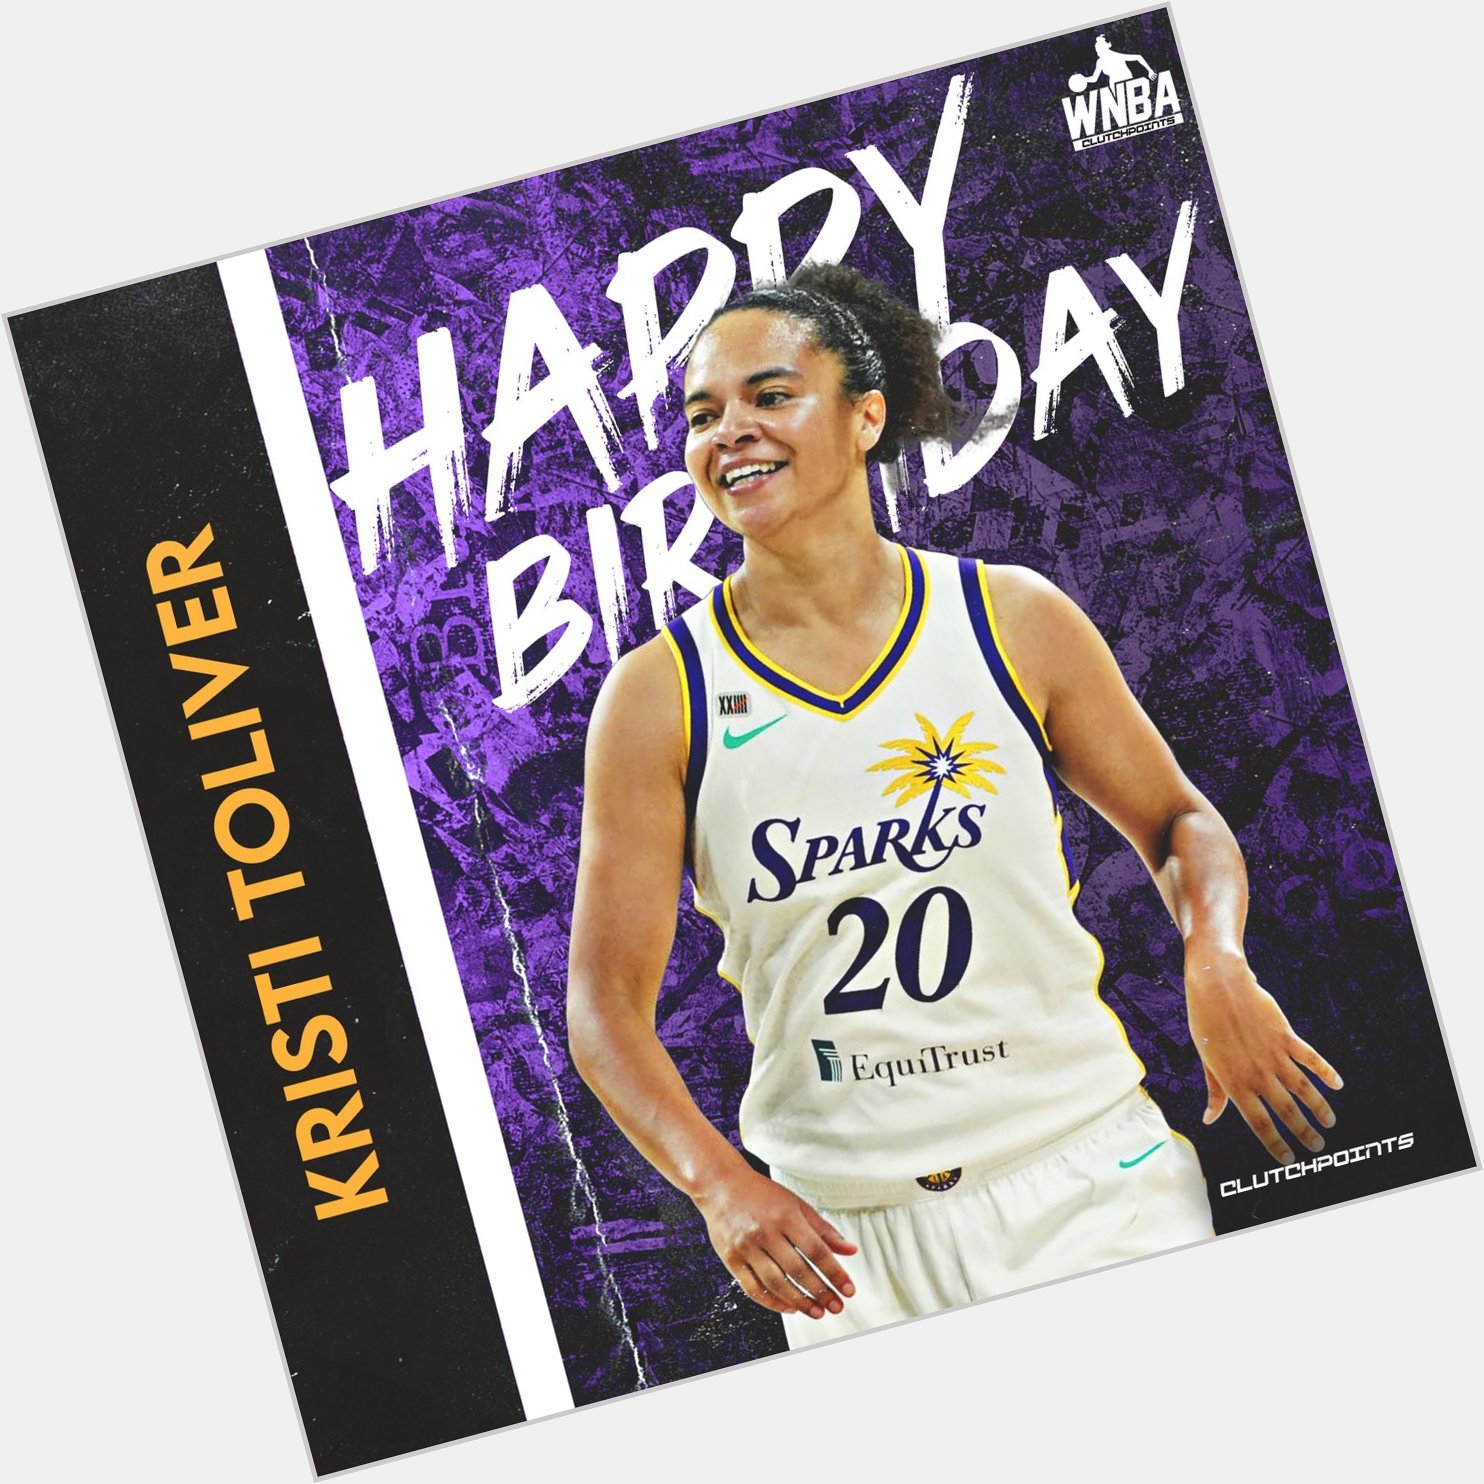 Join us as we greet a happy 35th birthday to the Sparks\ Kristi Toliver! 